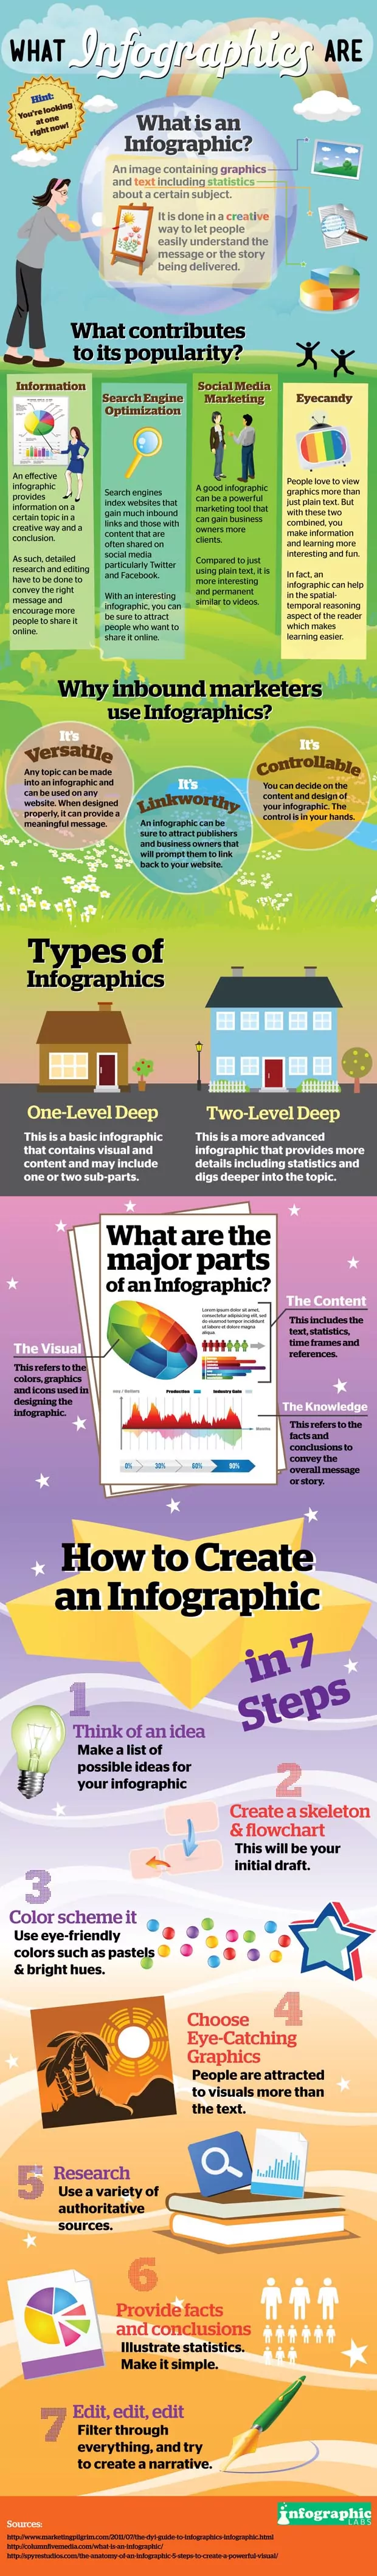 Tips tp create an engaging infographic